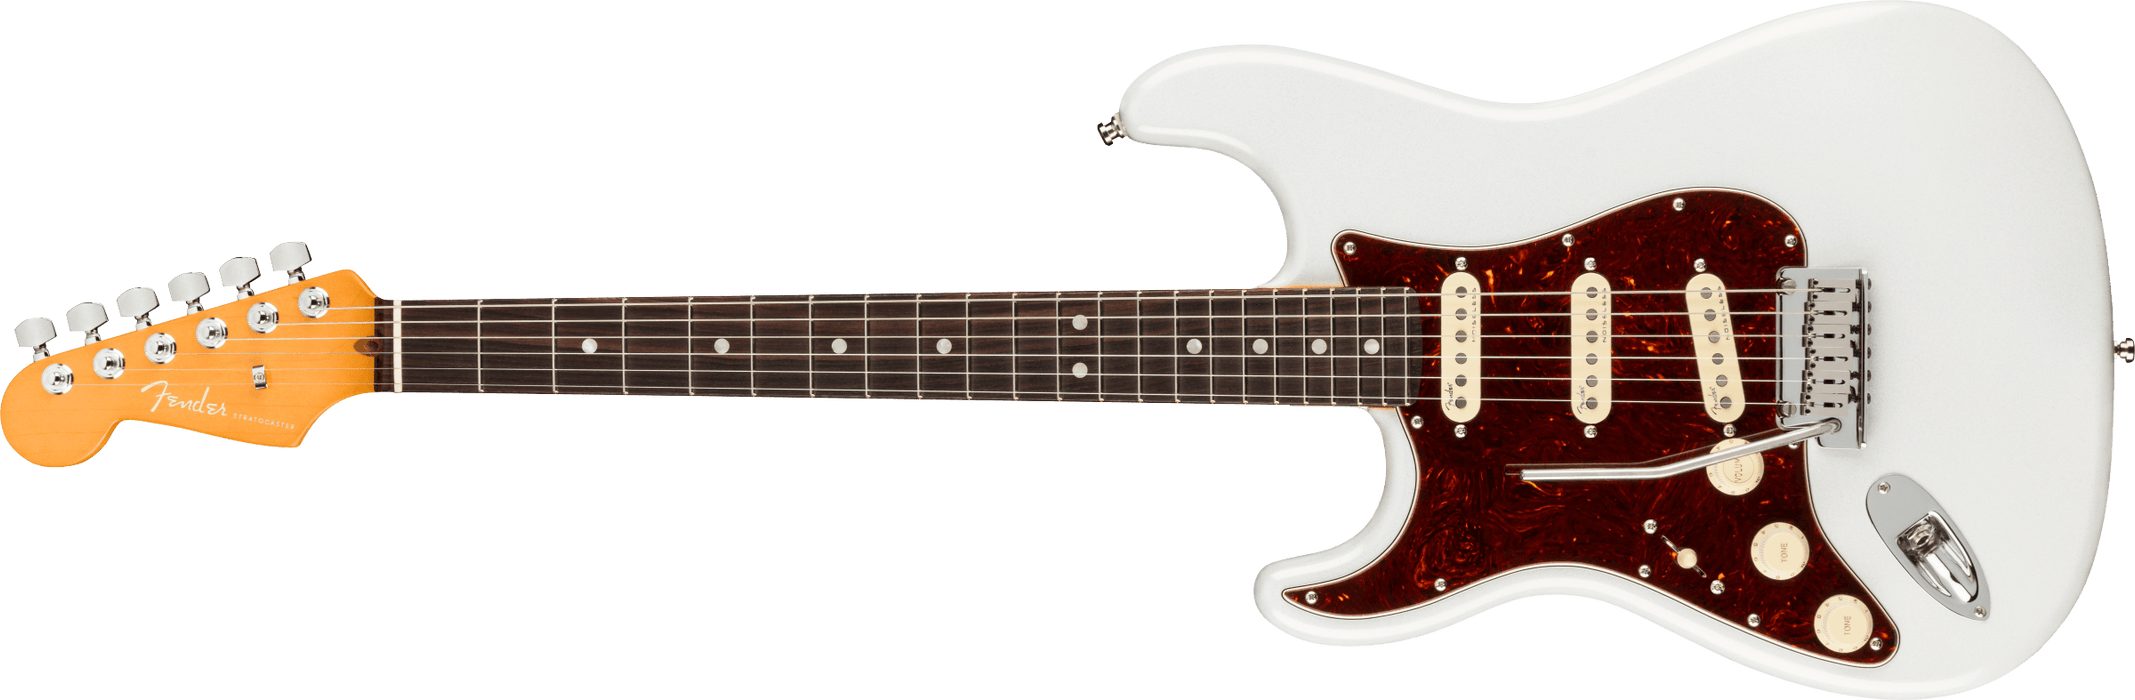 Fender American Ultra Stratocaster Left-Hand, Rosewood Fingerboard, Arctic Pearl